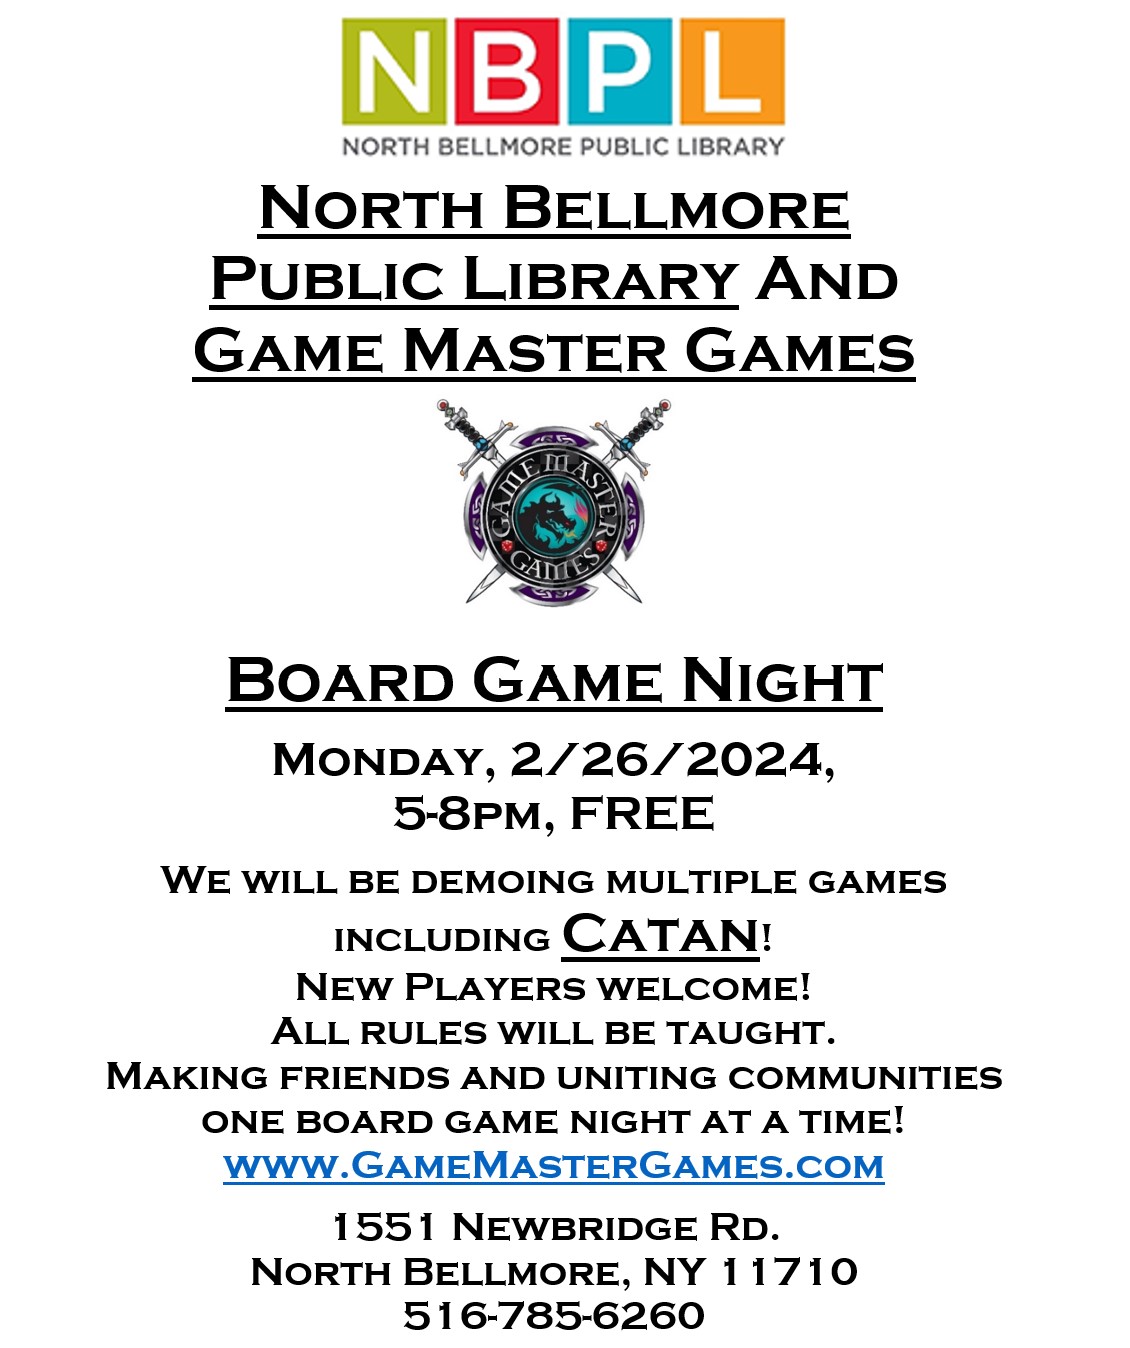 Have fun and make some new friends! Board Games at the North Bellmore Library!